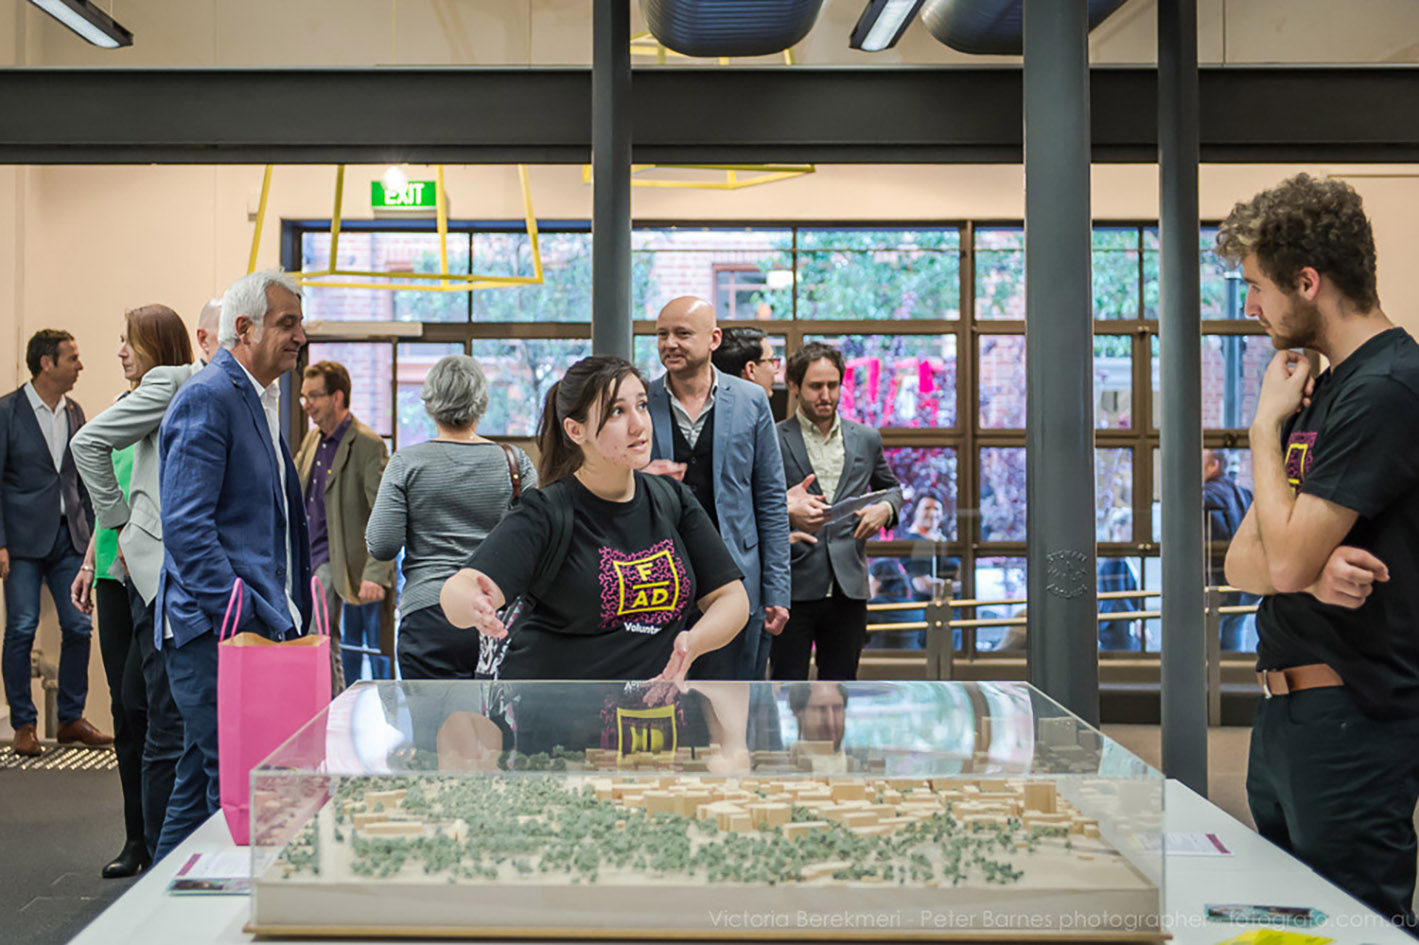 Members of the public viewing an architectural model at 28 Leigh Street